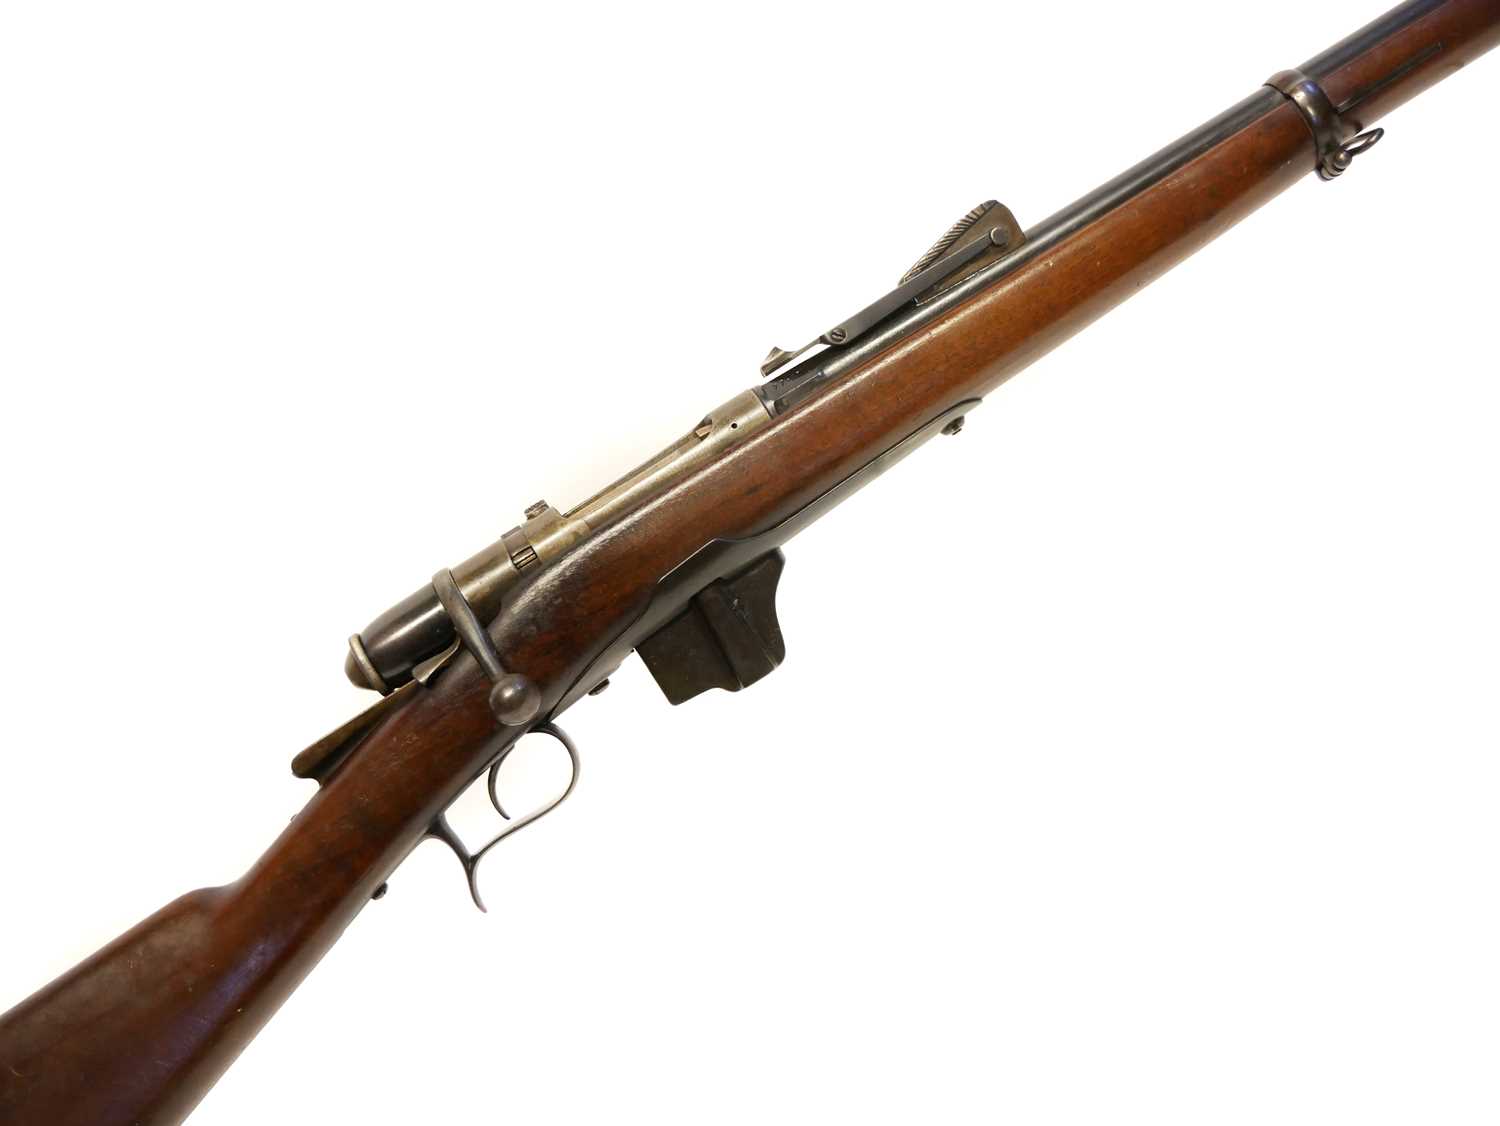 Italian Vetterli M.1870/87 10.35x47R bolt action rifle, serial number 5778, 33.5inch barrel fitted